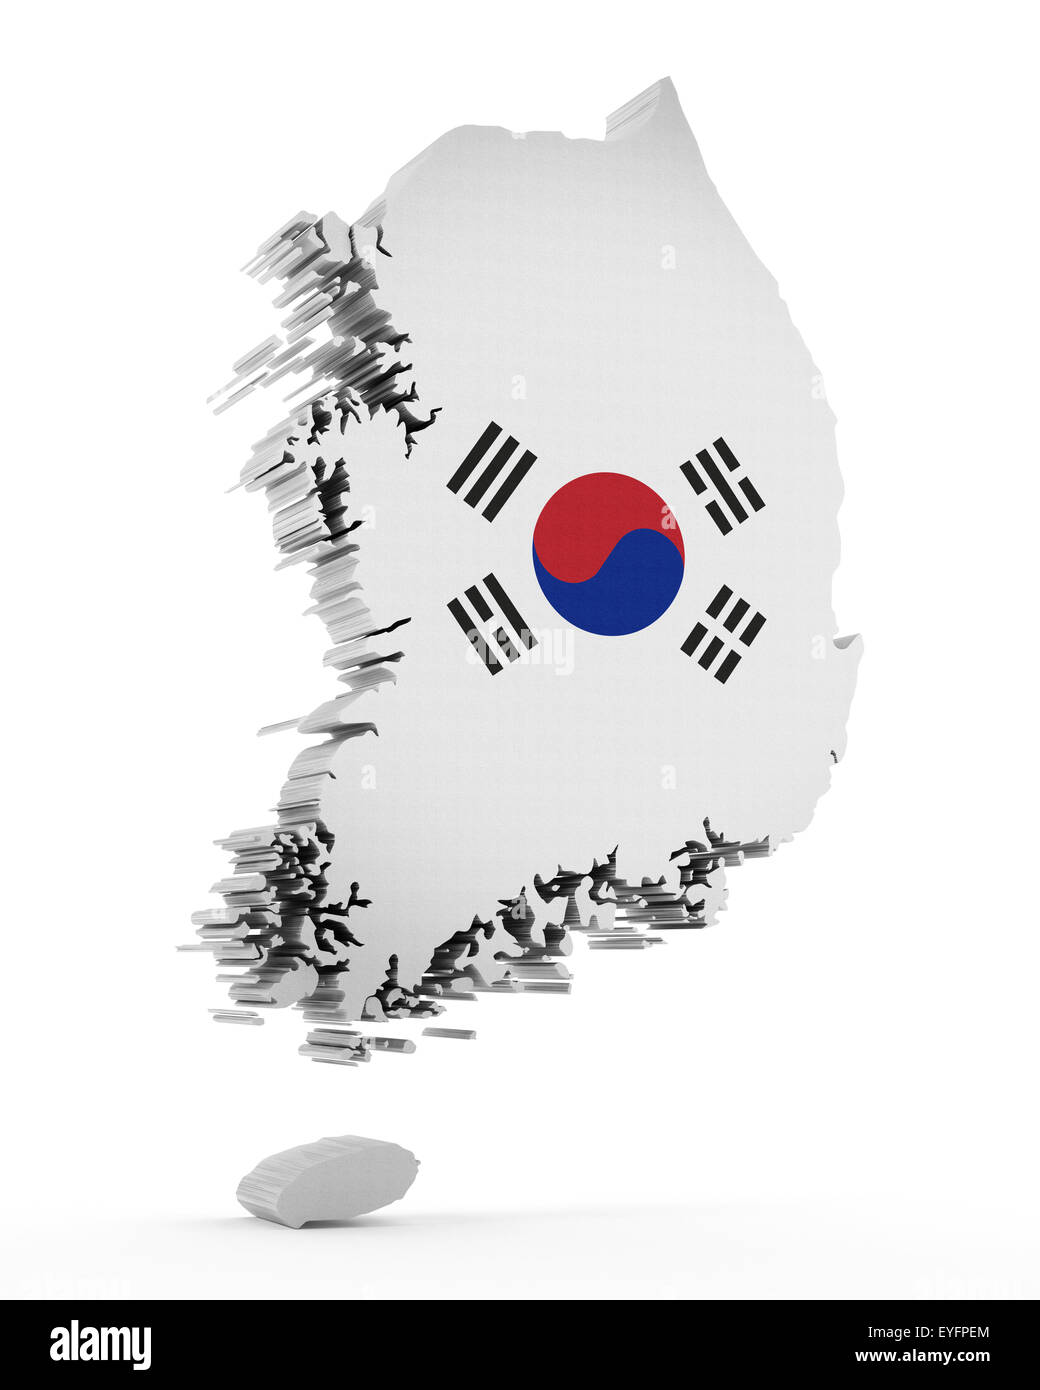 South Korea map and flag isolated on white background Stock Photo